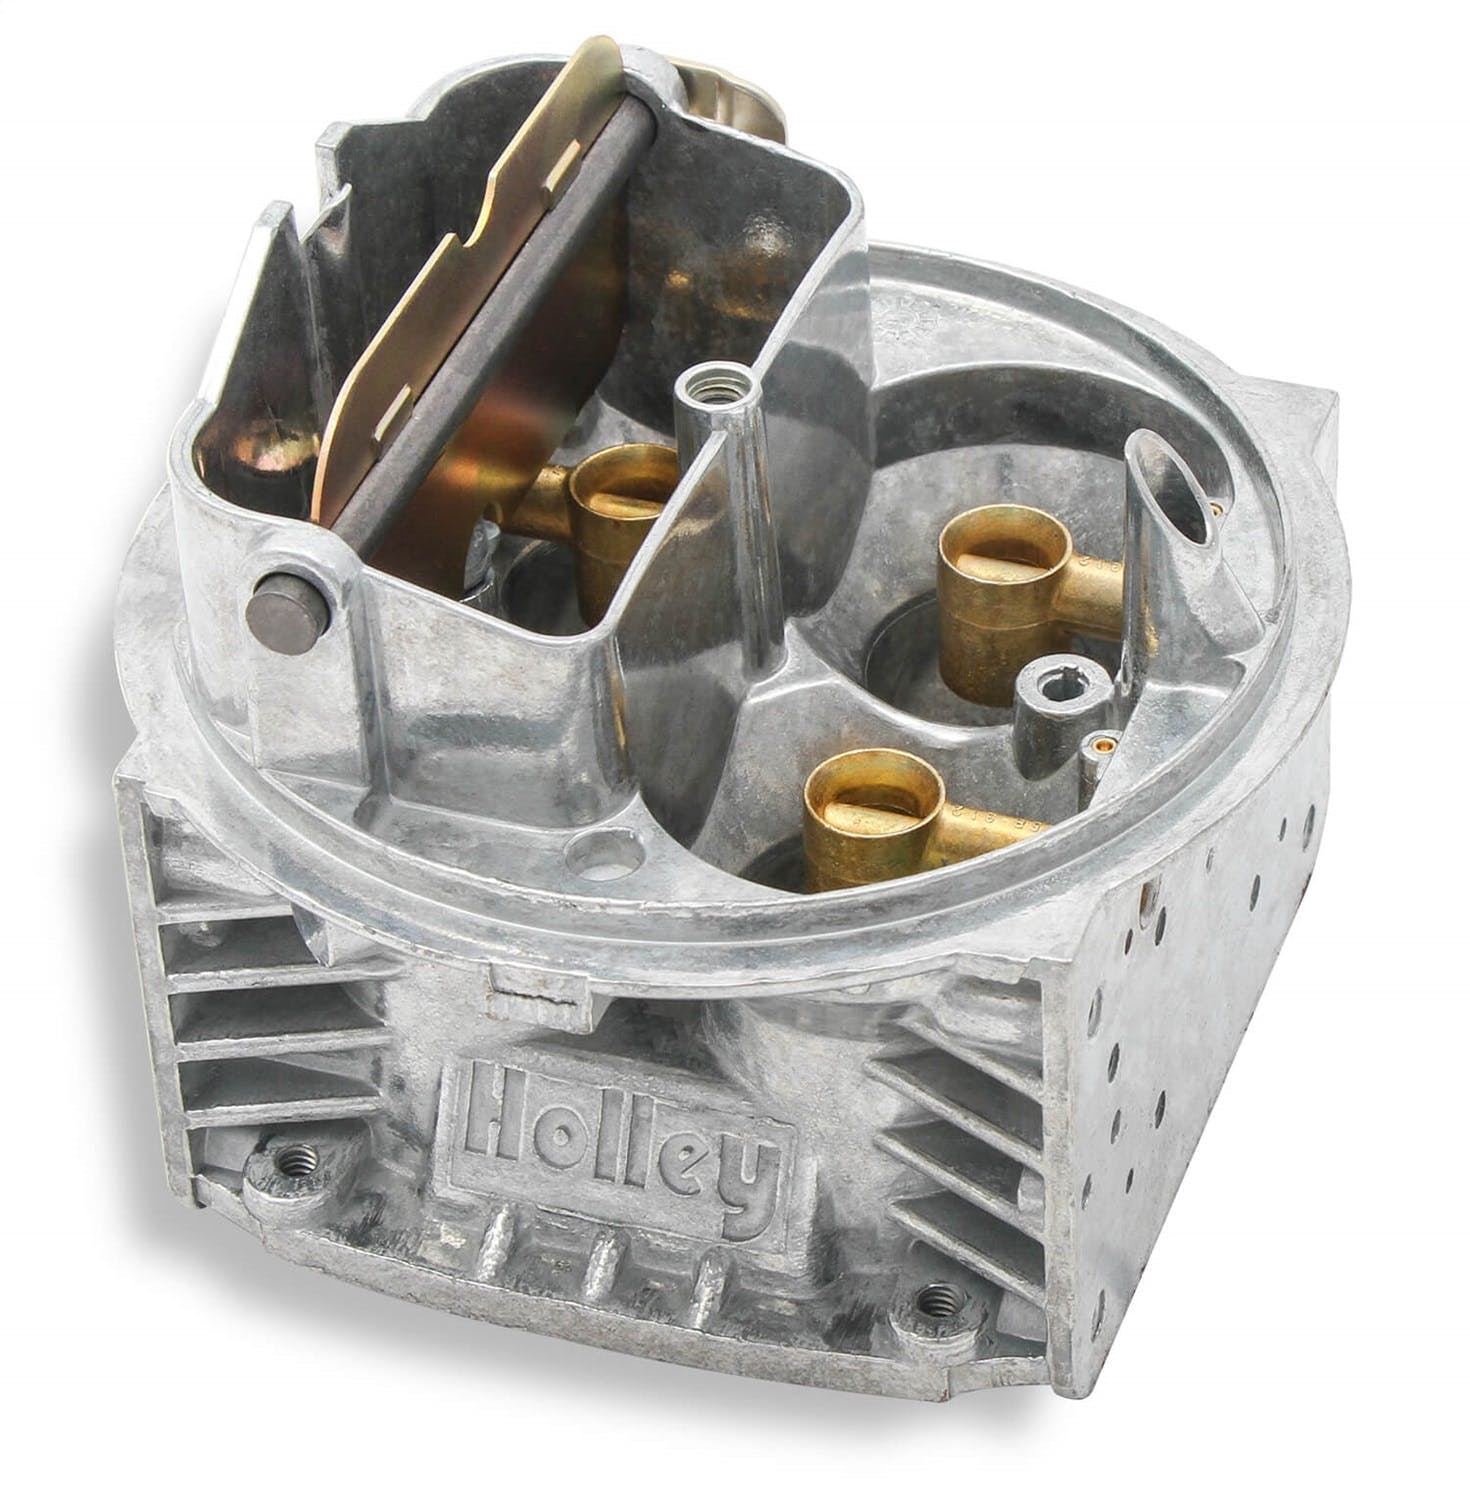 Holley 134-348 REPLACEMENT MAIN BODY KIT FOR 0-80670